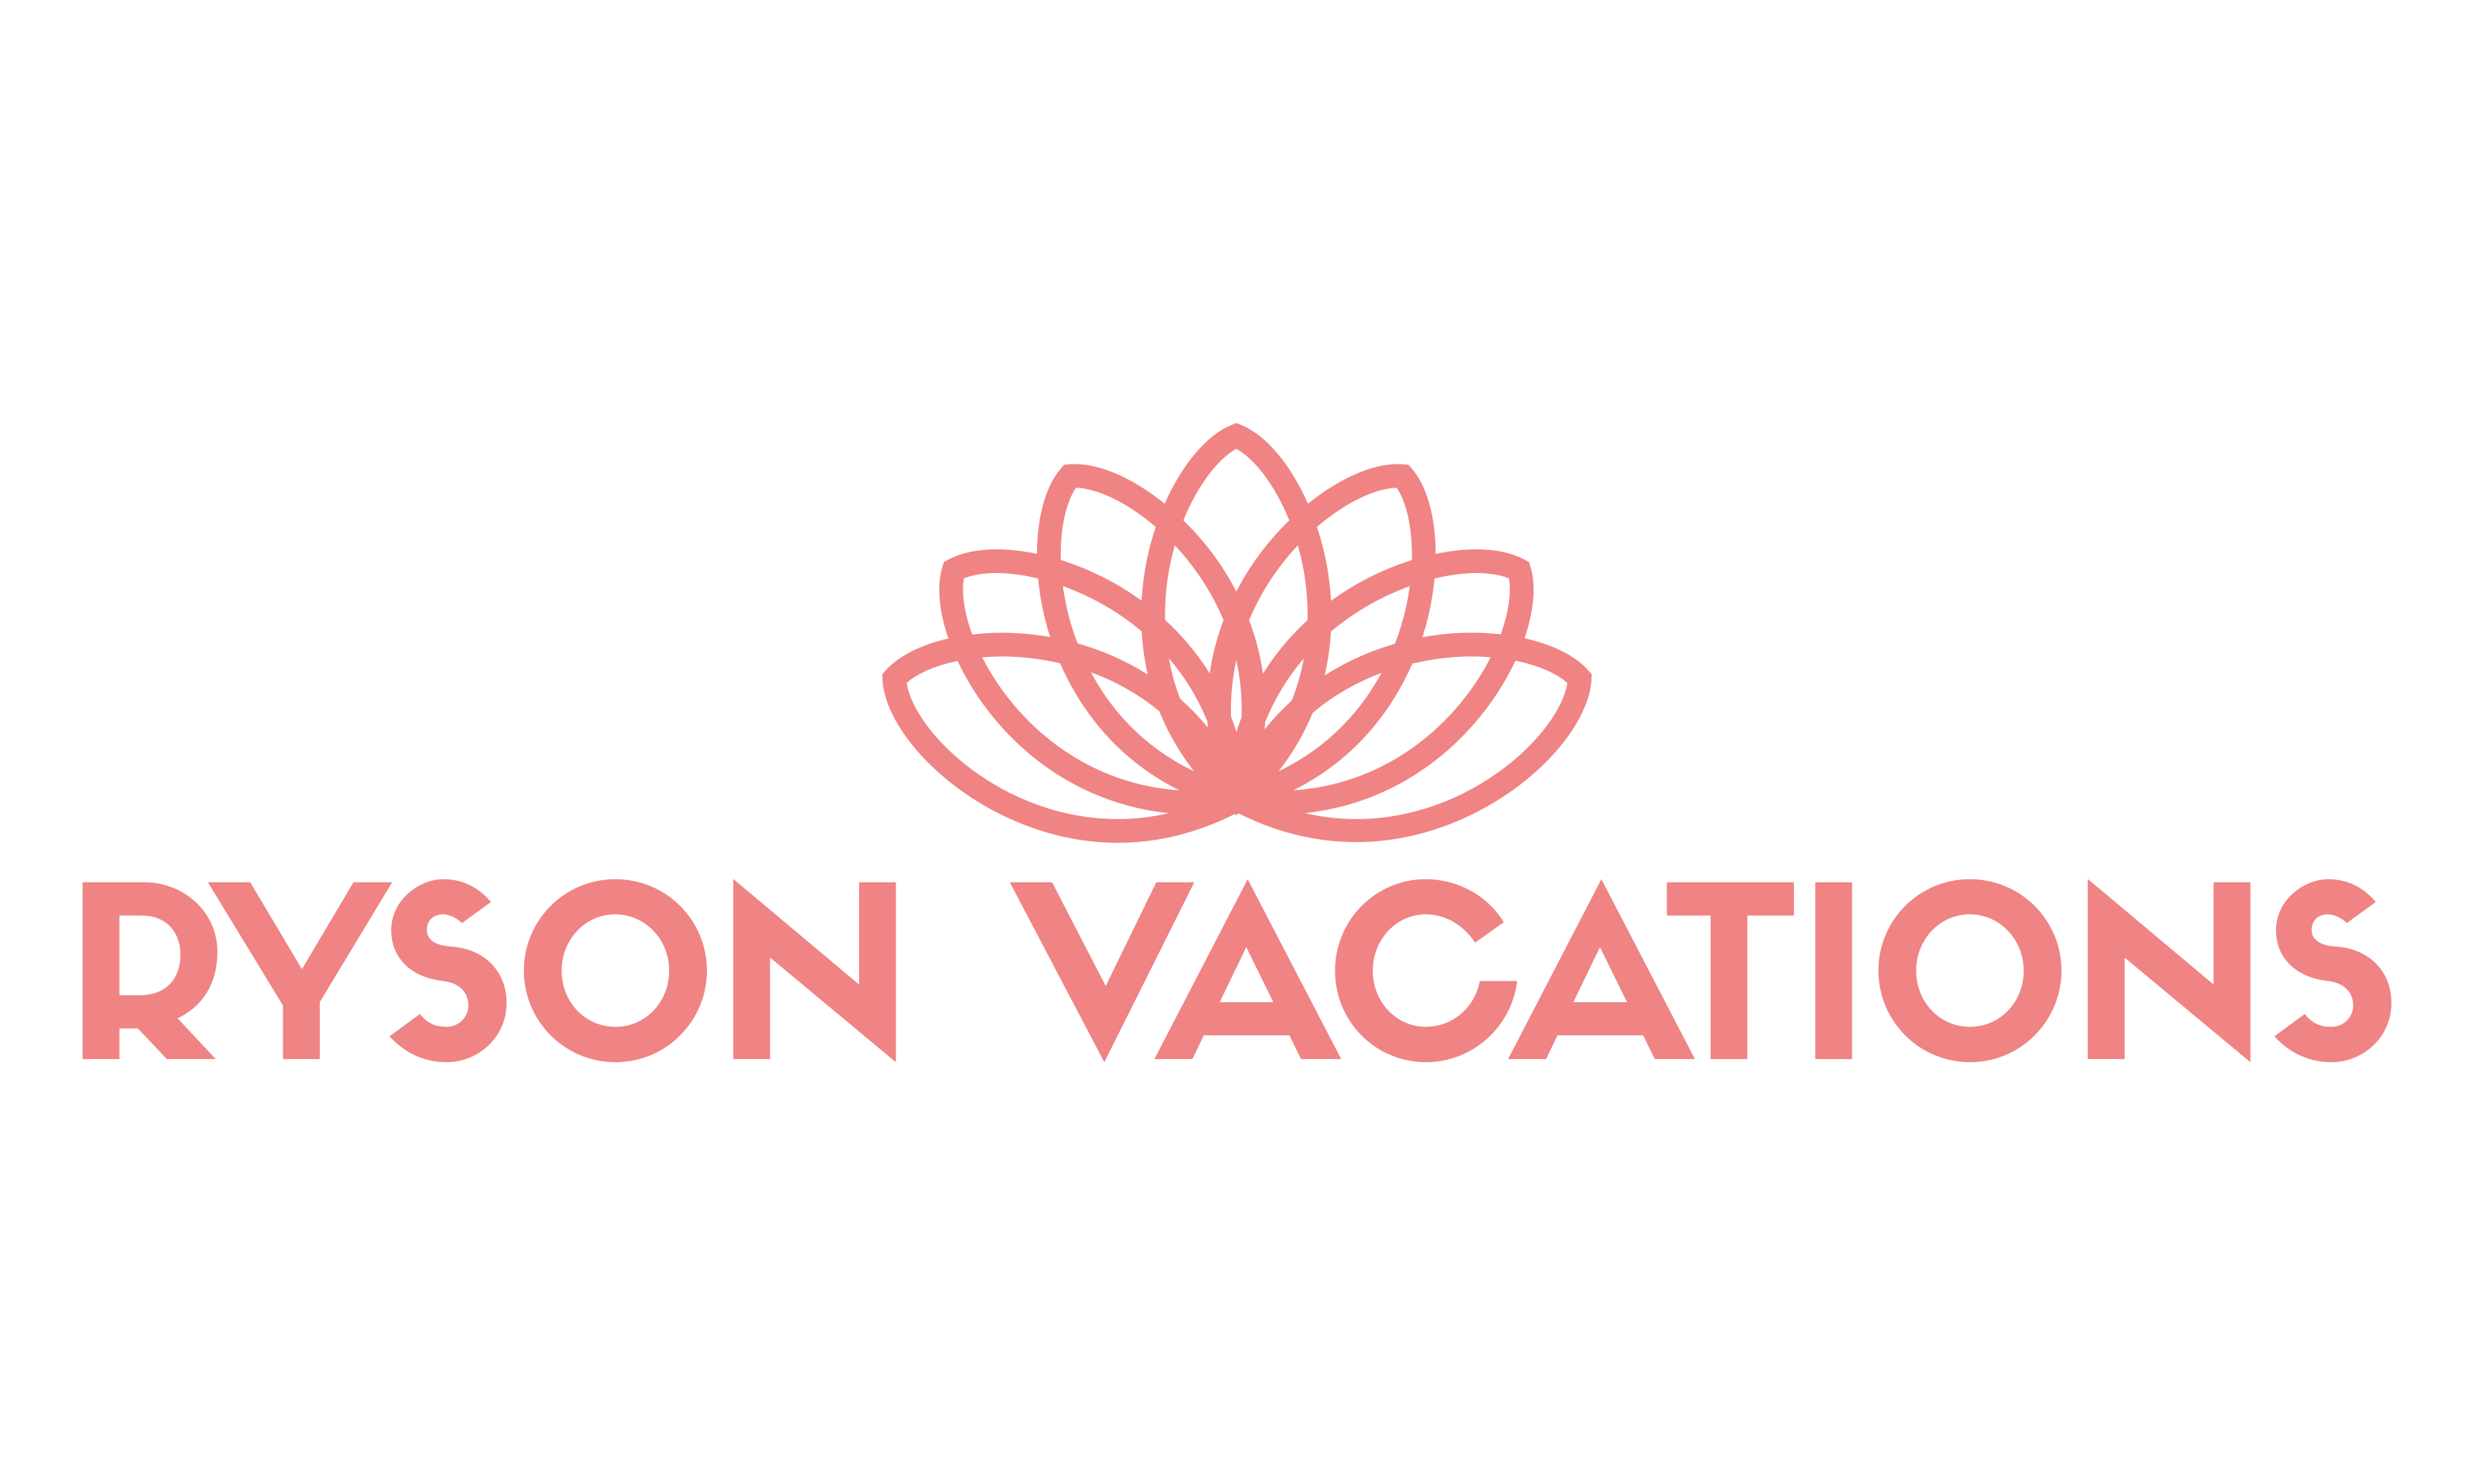 Palm Springs Vacation Rentals by Ryson Vacations